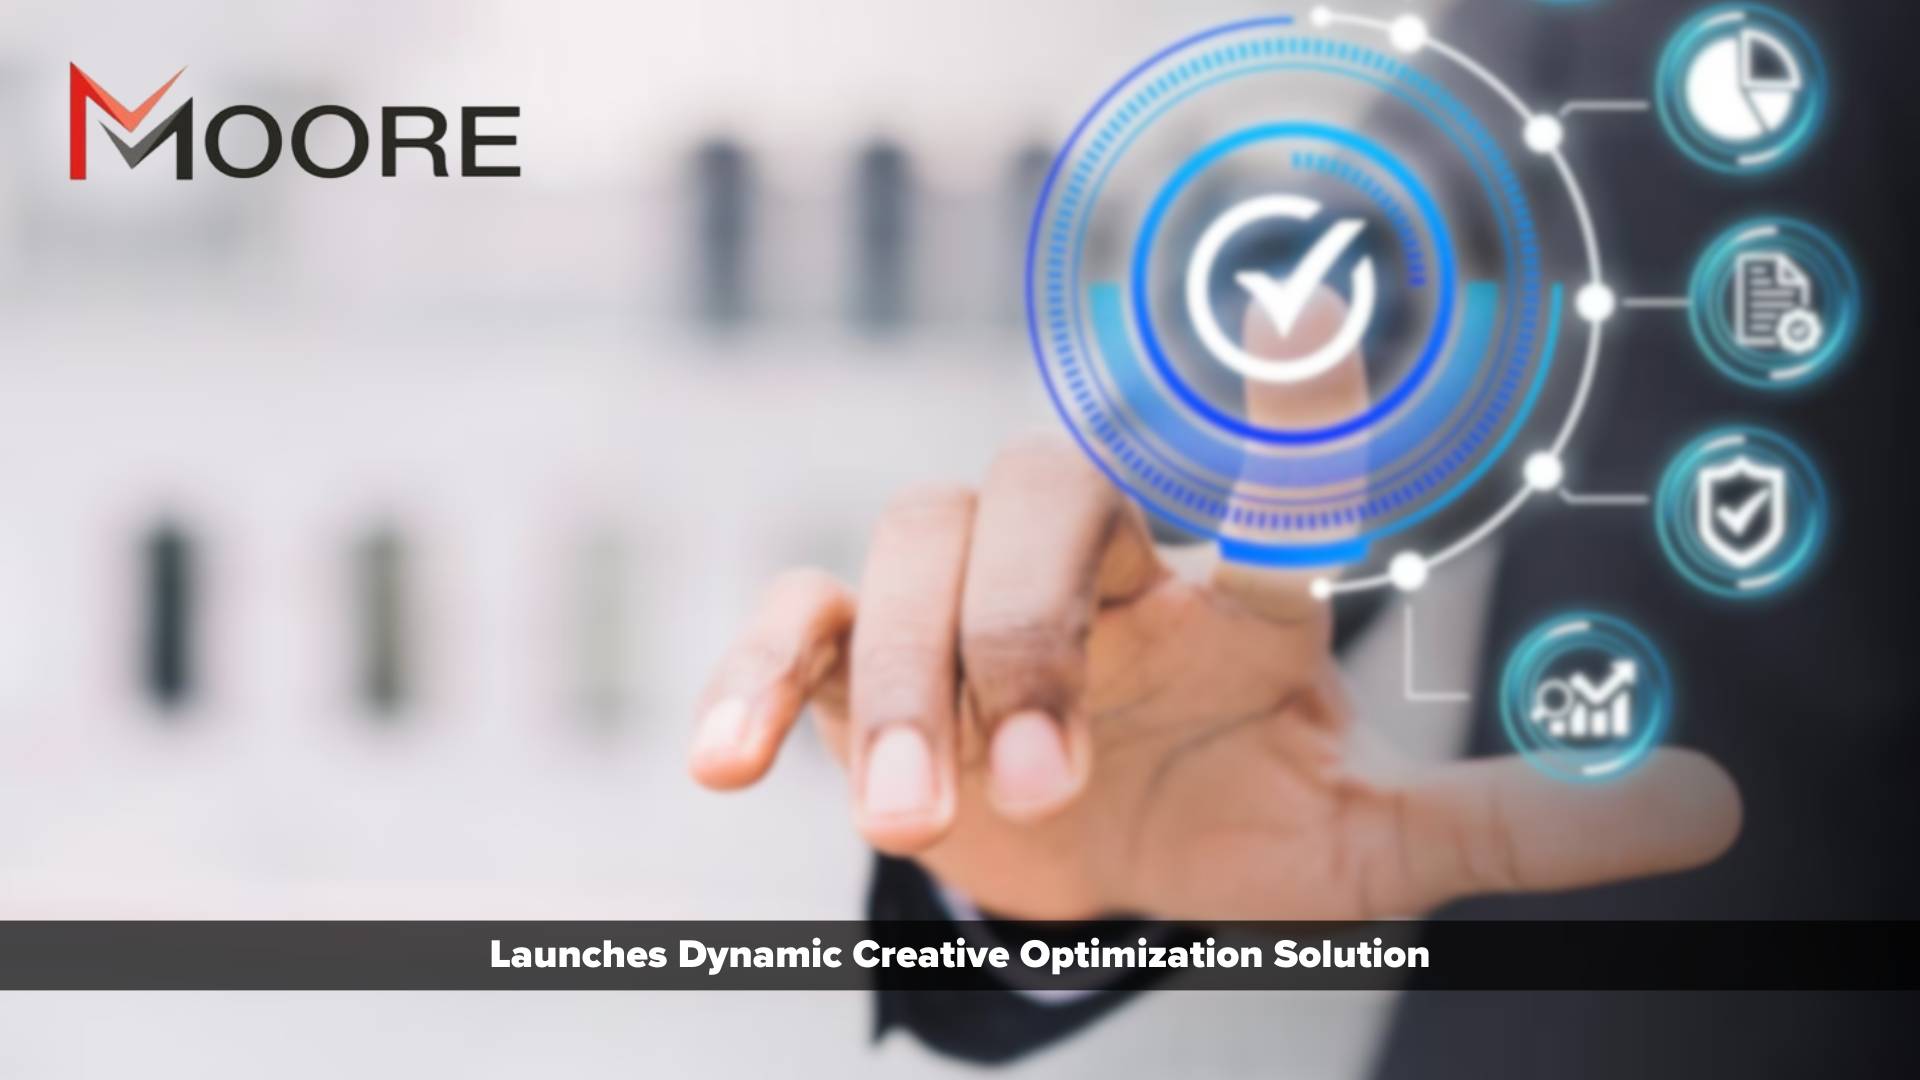 Moore Launches Dynamic Creative Optimization Solution for Hyper-Personalized Fundraising